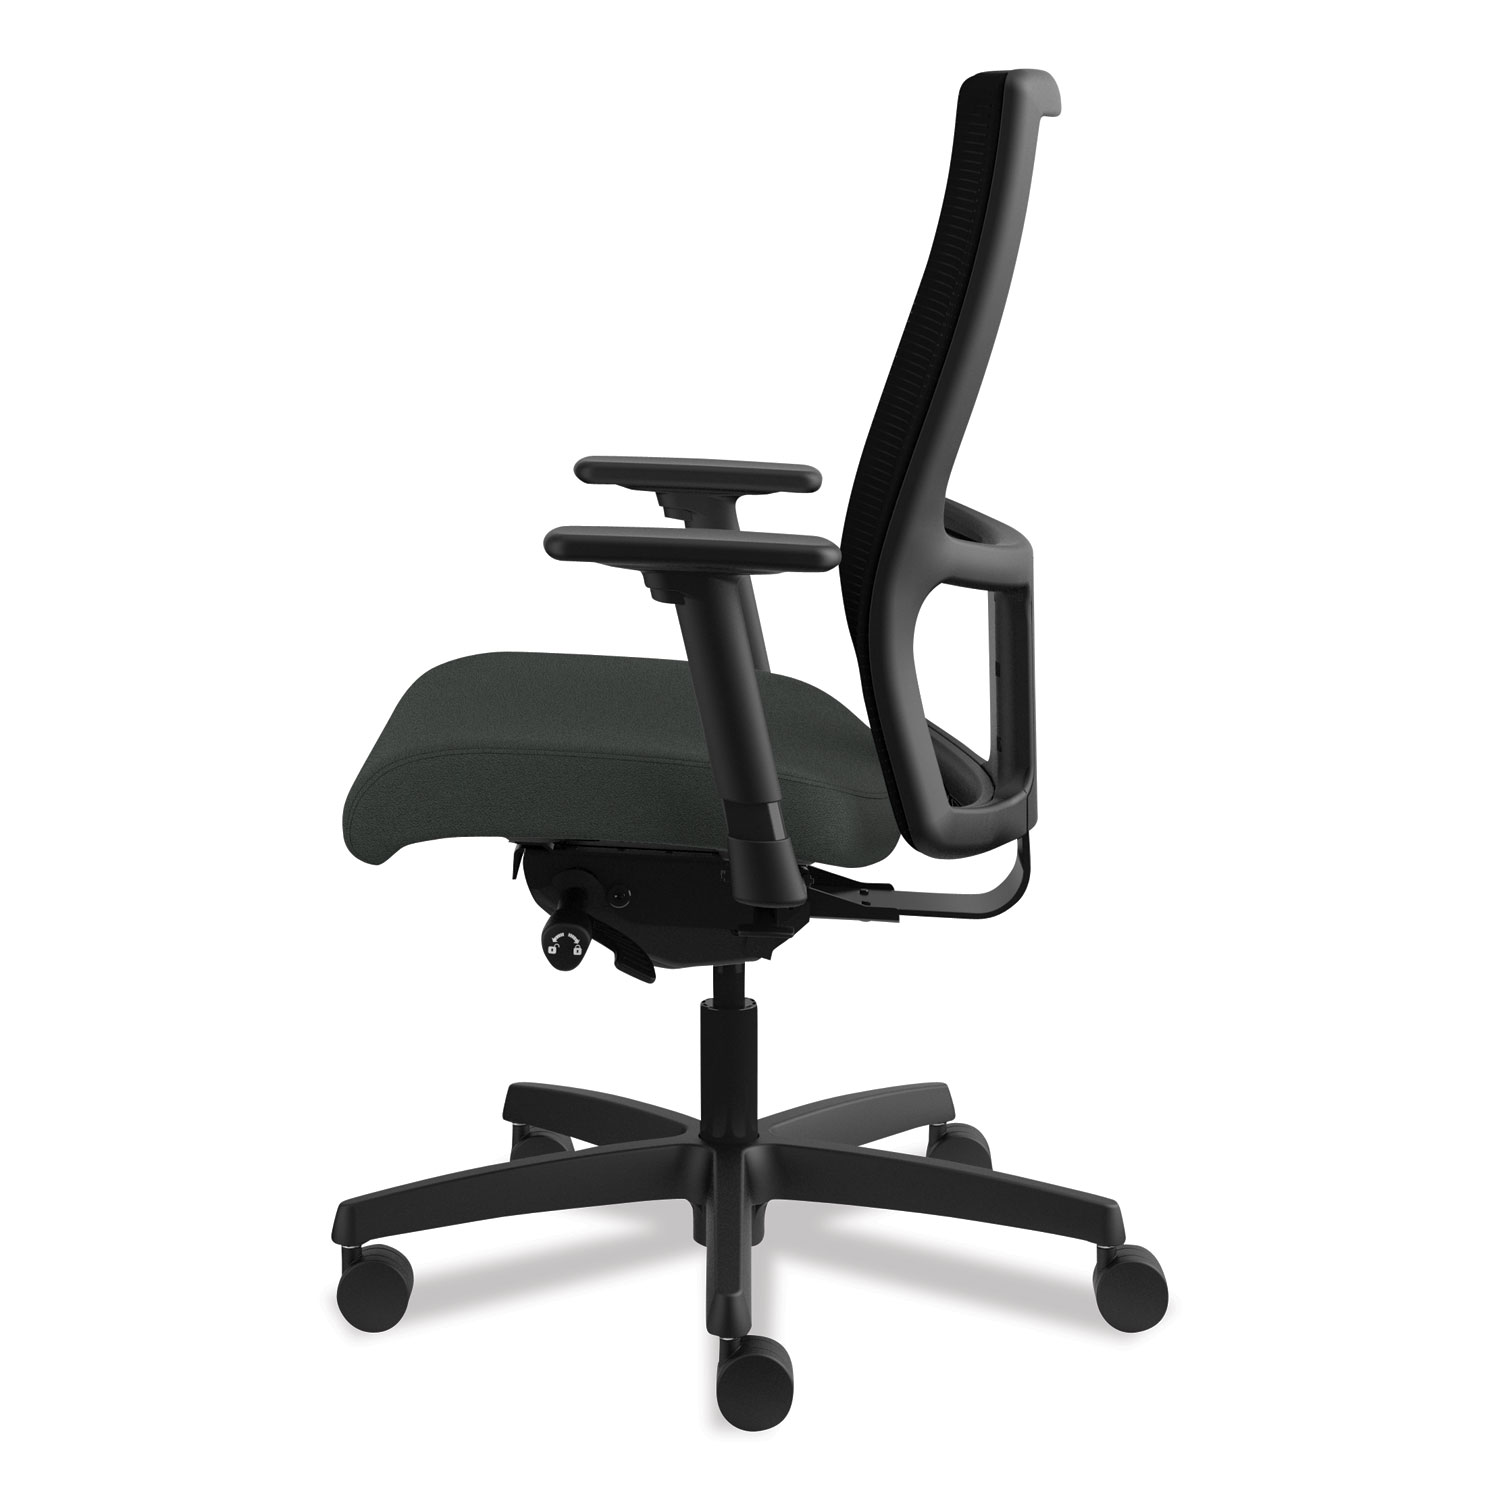 Ignition Series Mesh Mid-Back Work Chair, Supports up to 300 lbs., Iron Ore Seat/Black Back, Black Base